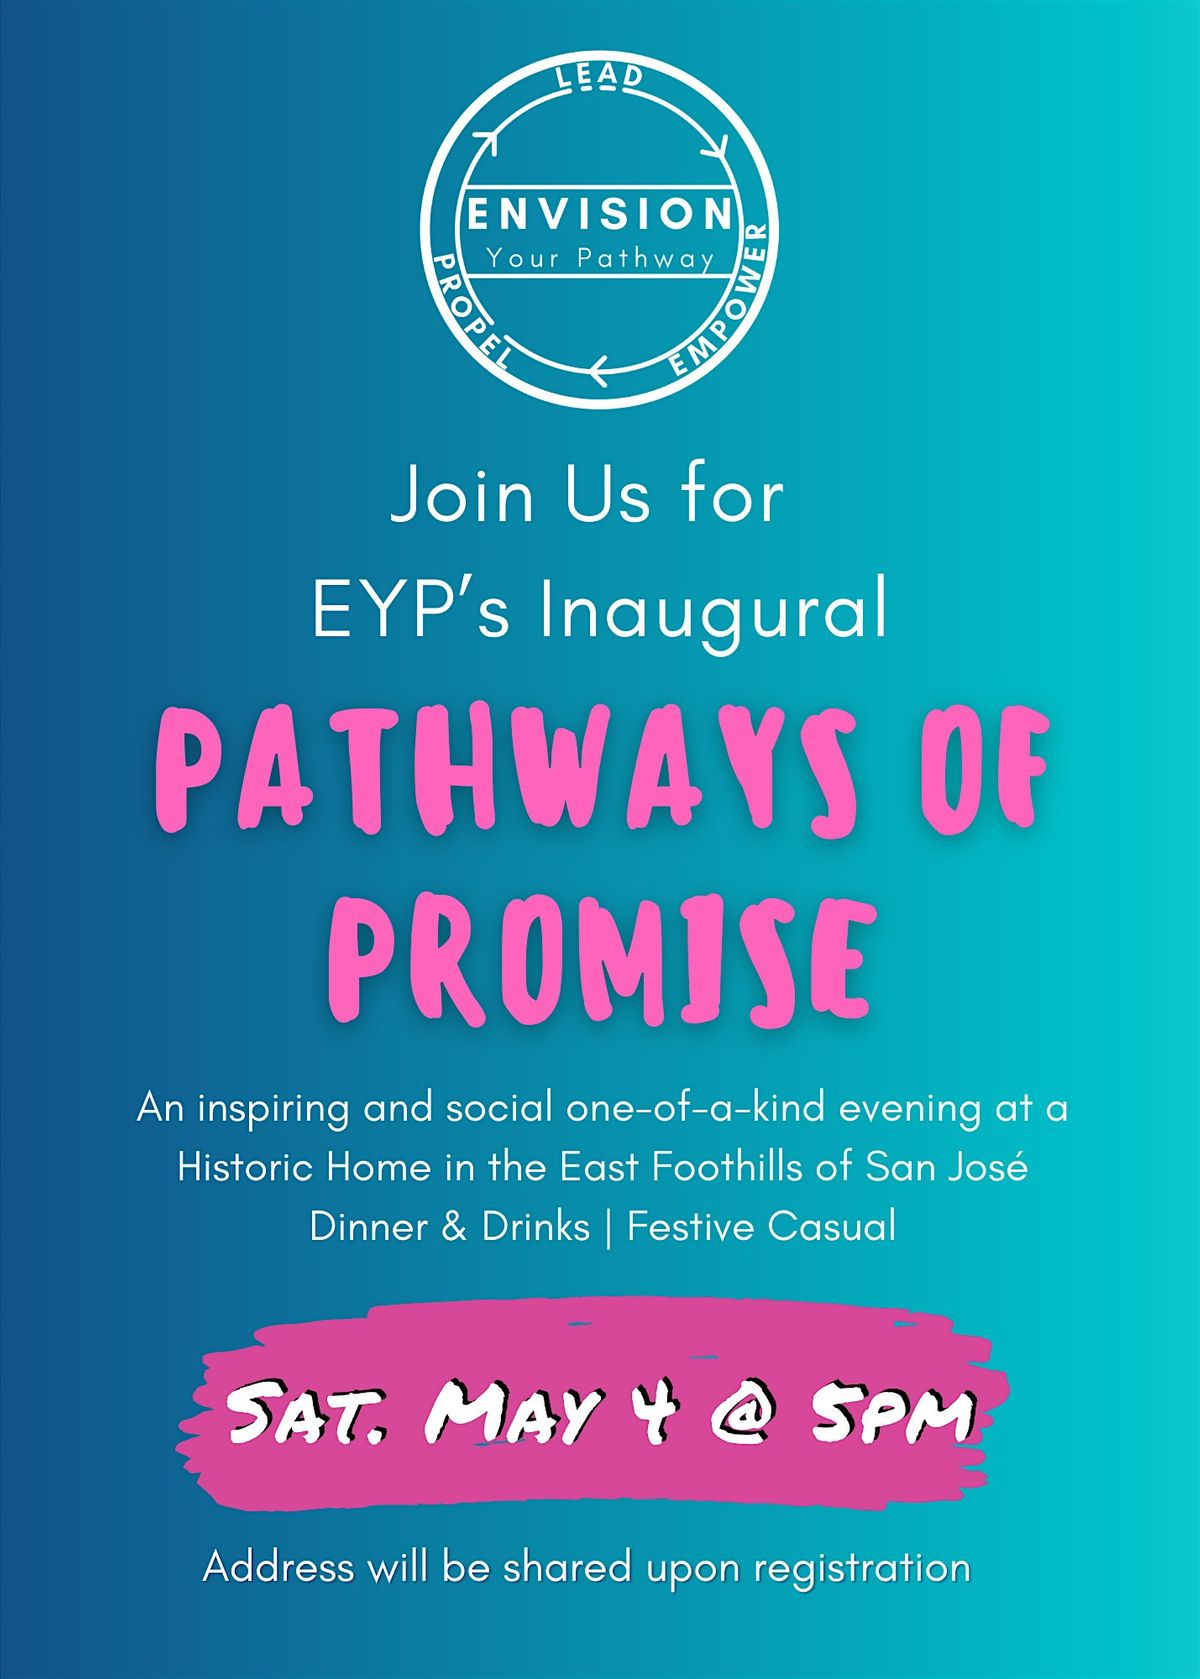 EYP's Inaugural Pathways of Promise